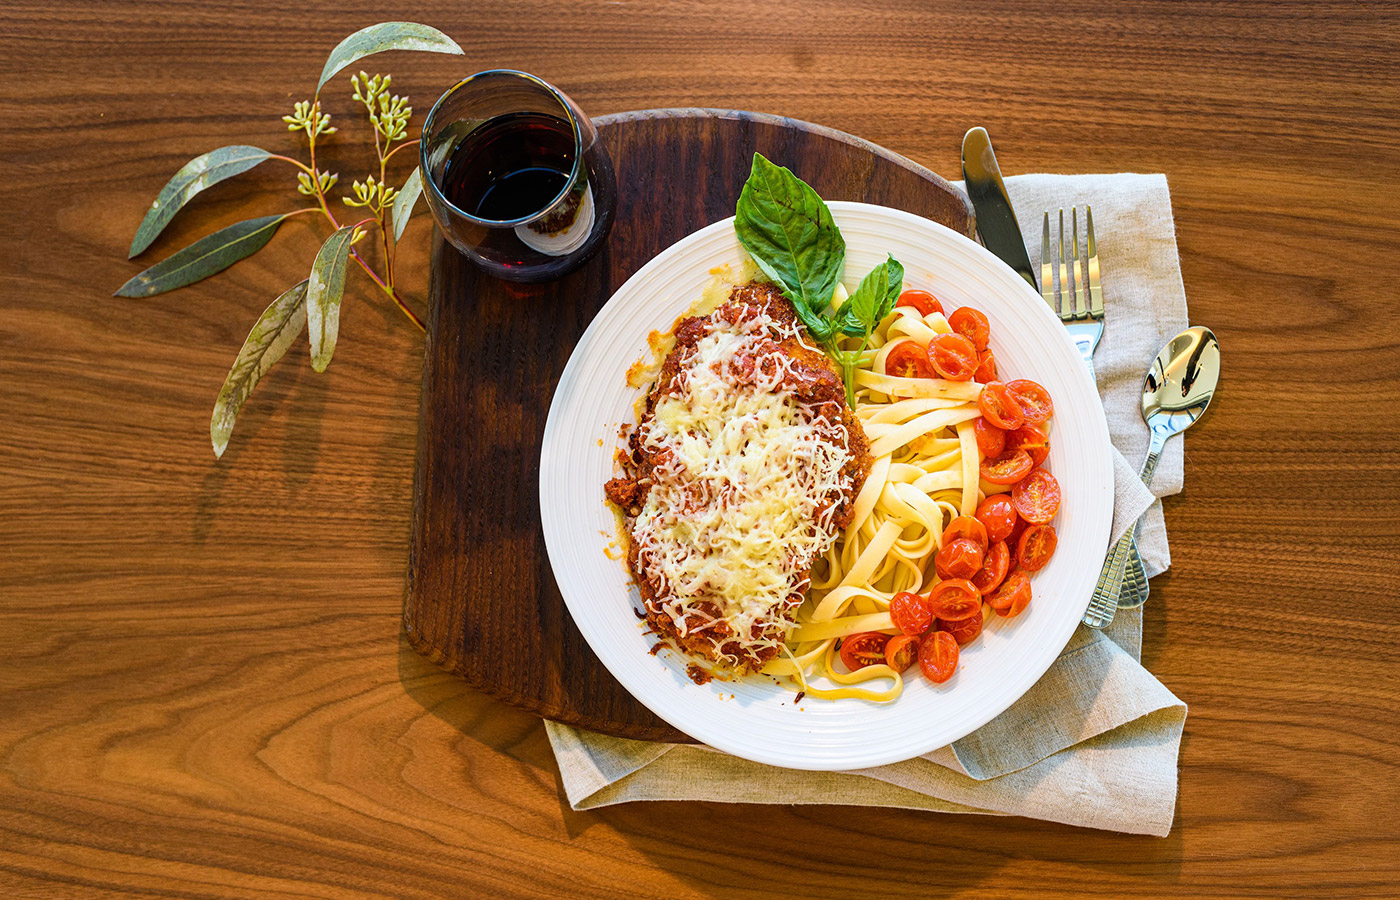 A plate of spaghetti and a glass of wine.